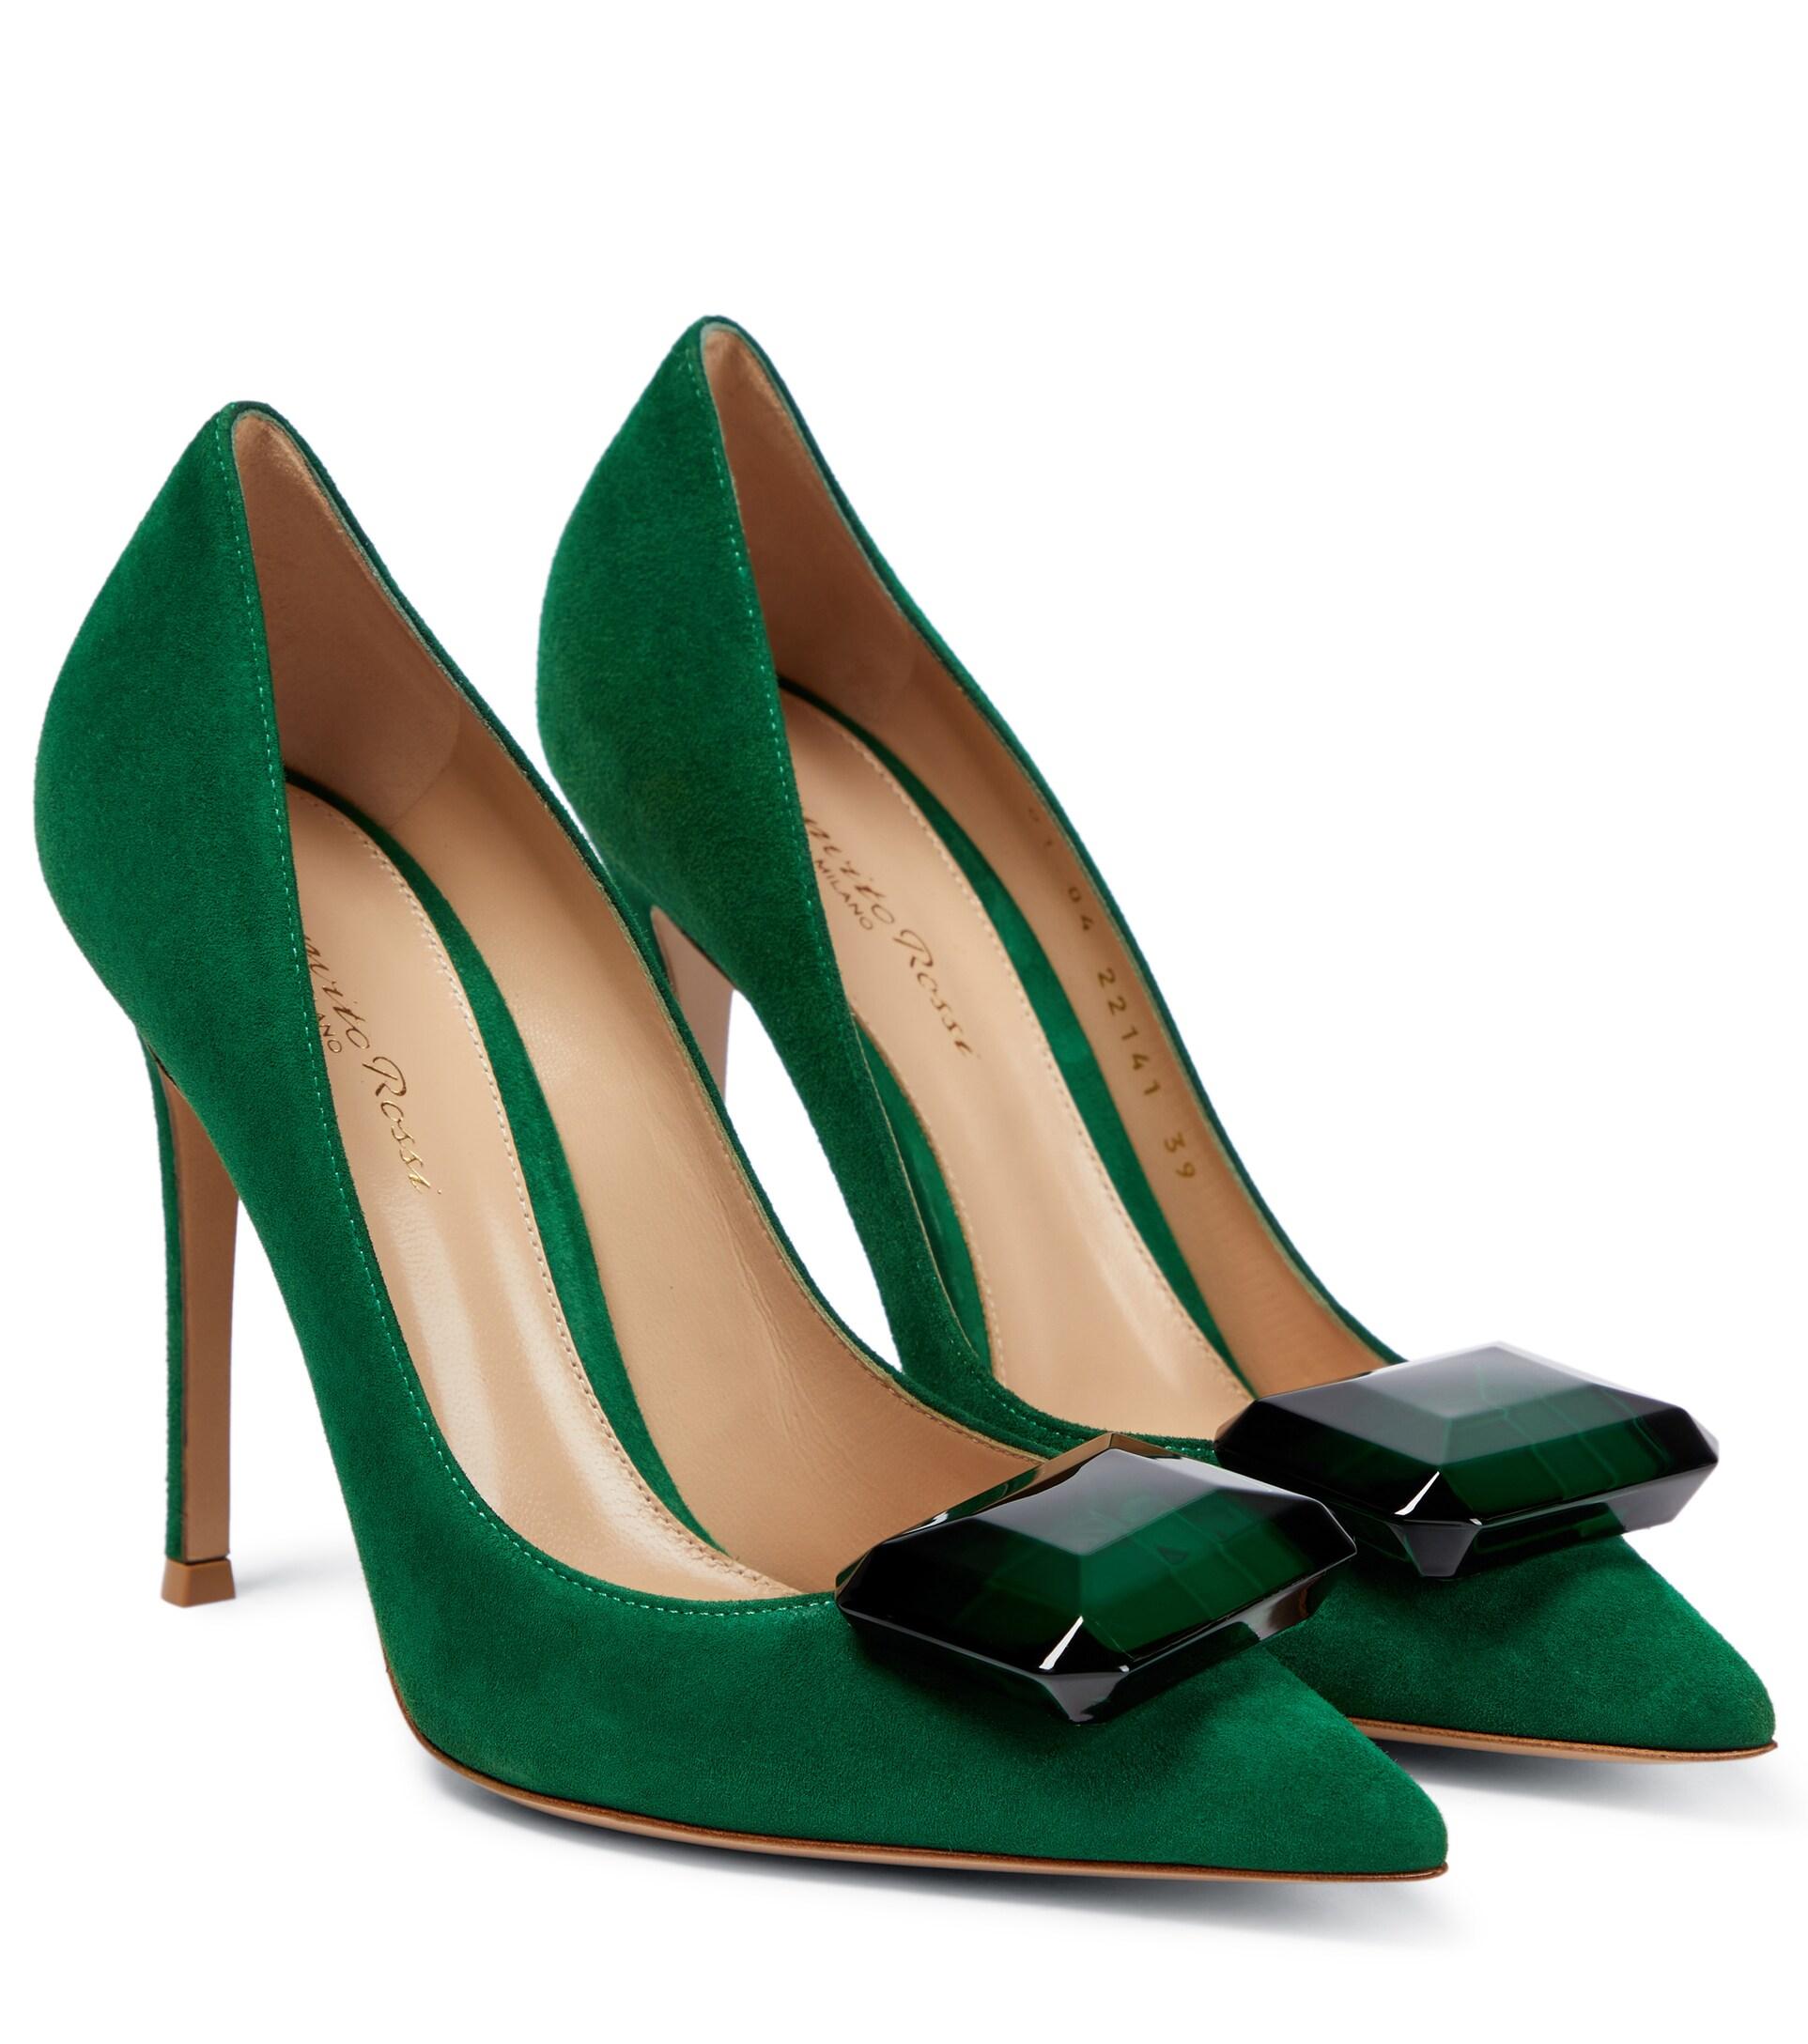 Gianvito Rossi Jaipur 105 Embellished Suede Pumps in Green | Lyst